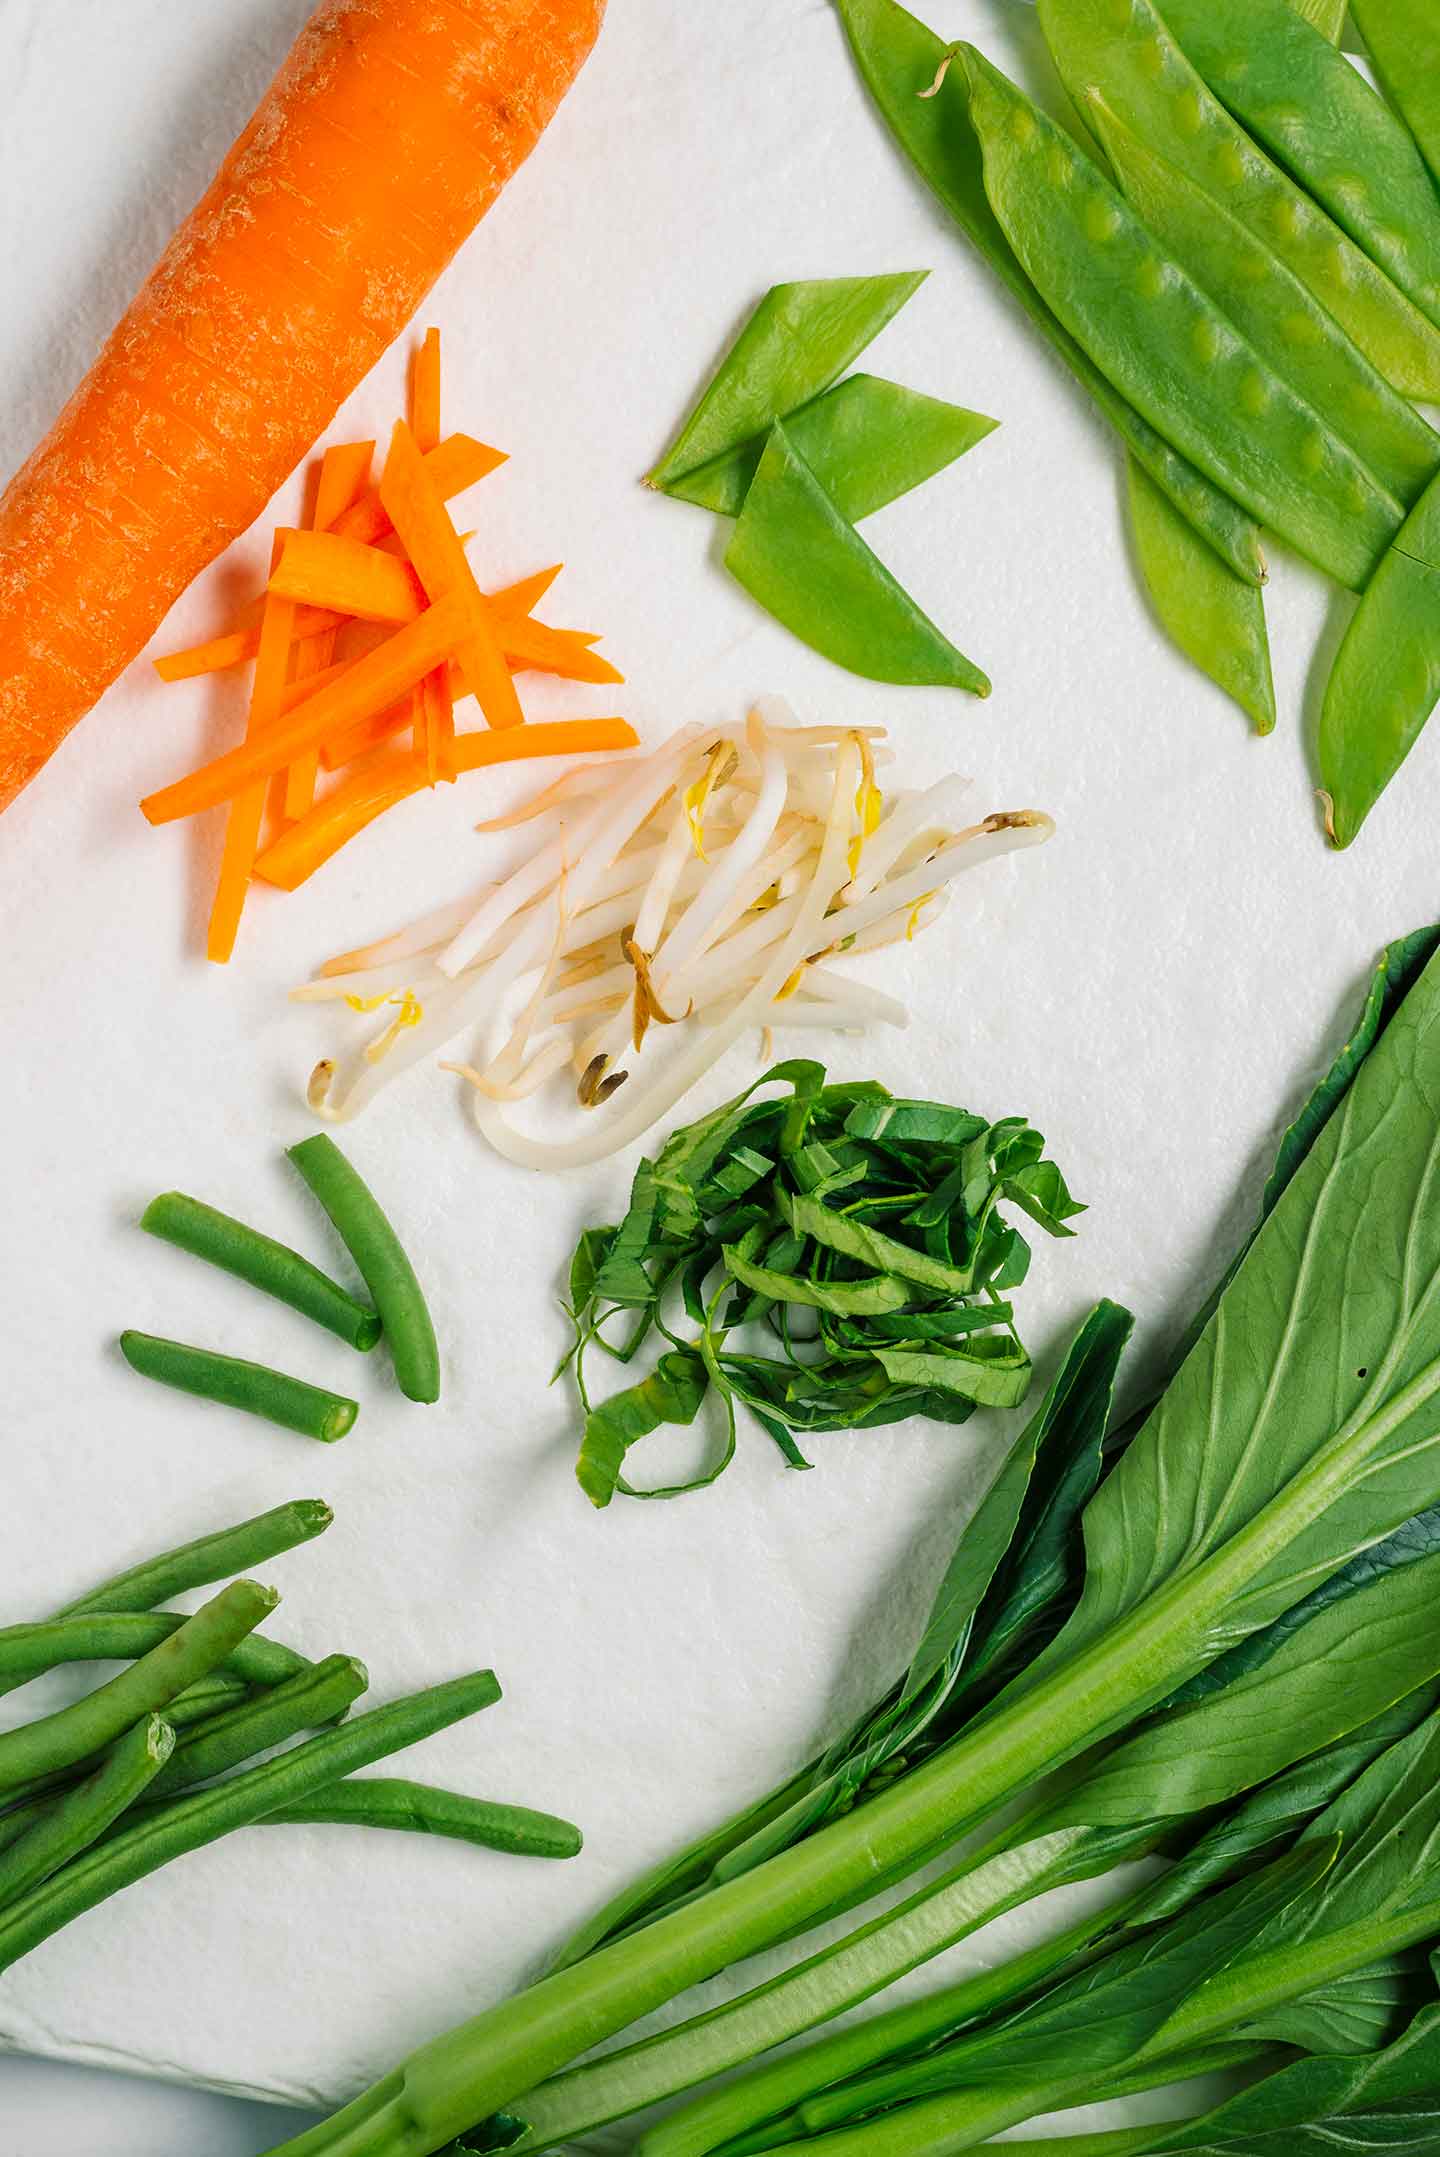 Top down view of chopped vegetables. A carrot is julienned, snow peas and green beans are cut in thirds, yu choy is ribboned and bean sprouts lay in the centre. 